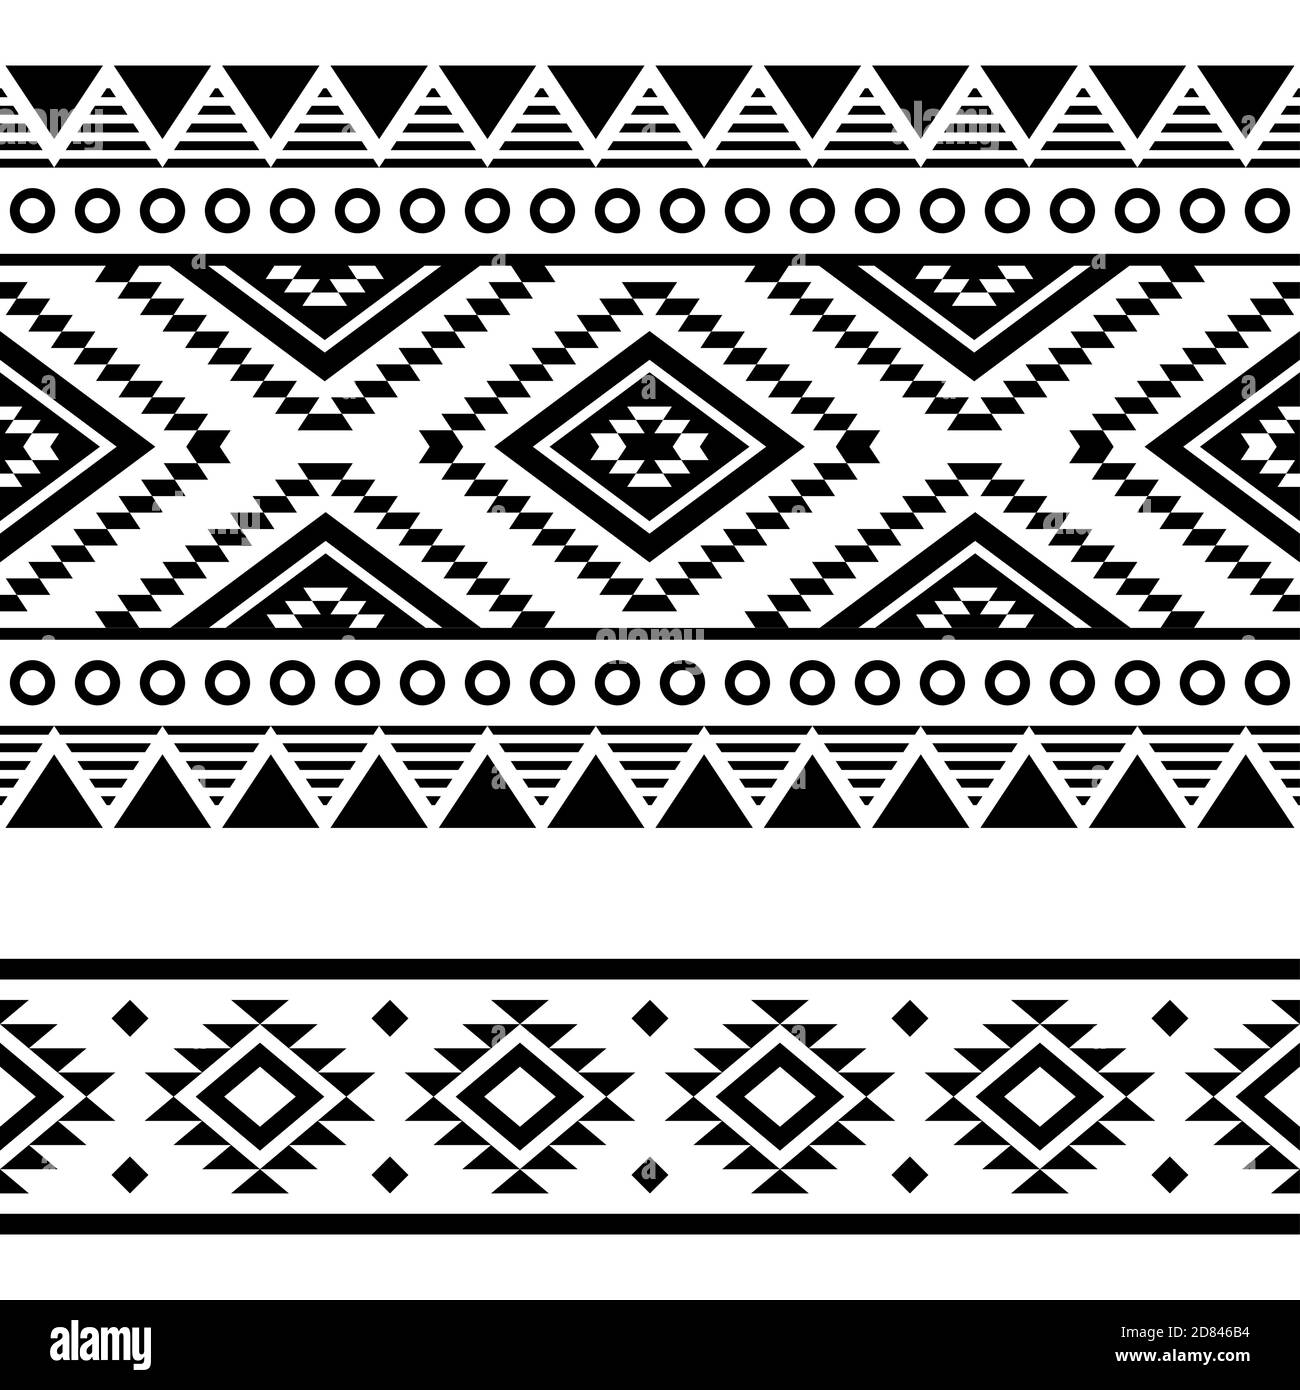 Aztec tribal geometric seamless vector two patterns set, Navajo geometric designs in black and white Stock Vector